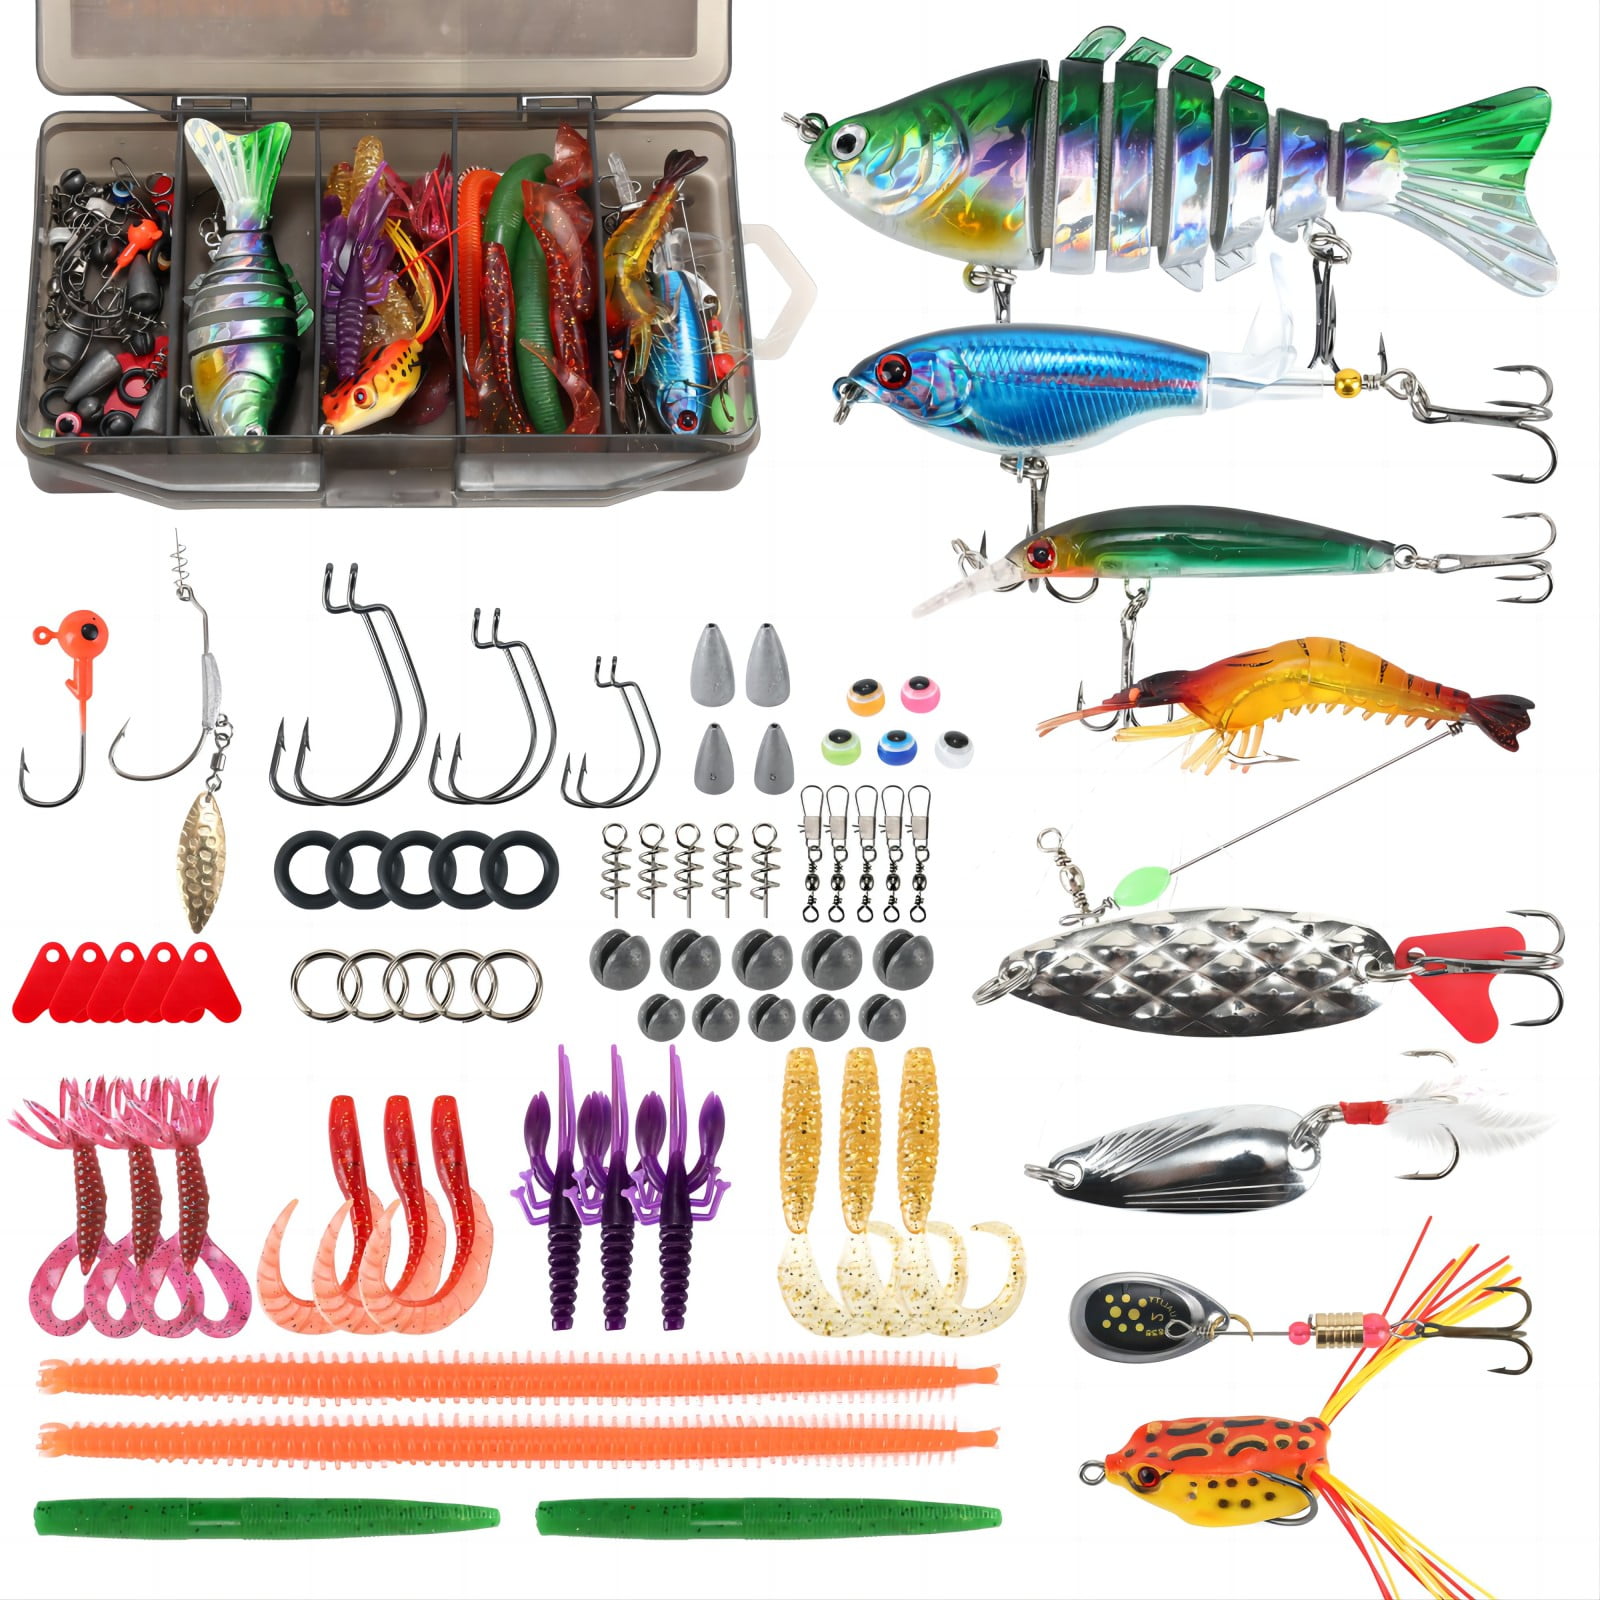 Fishing Lures Tackle Box Kit,Saltwater Freshwater Fishing Gear and  Equipment,Including Bionic Swimbait,Top Water Fishing Lure,Soft Plastic  Baits,Fishing Accessories etc for Bass,Trout, Salmon. 